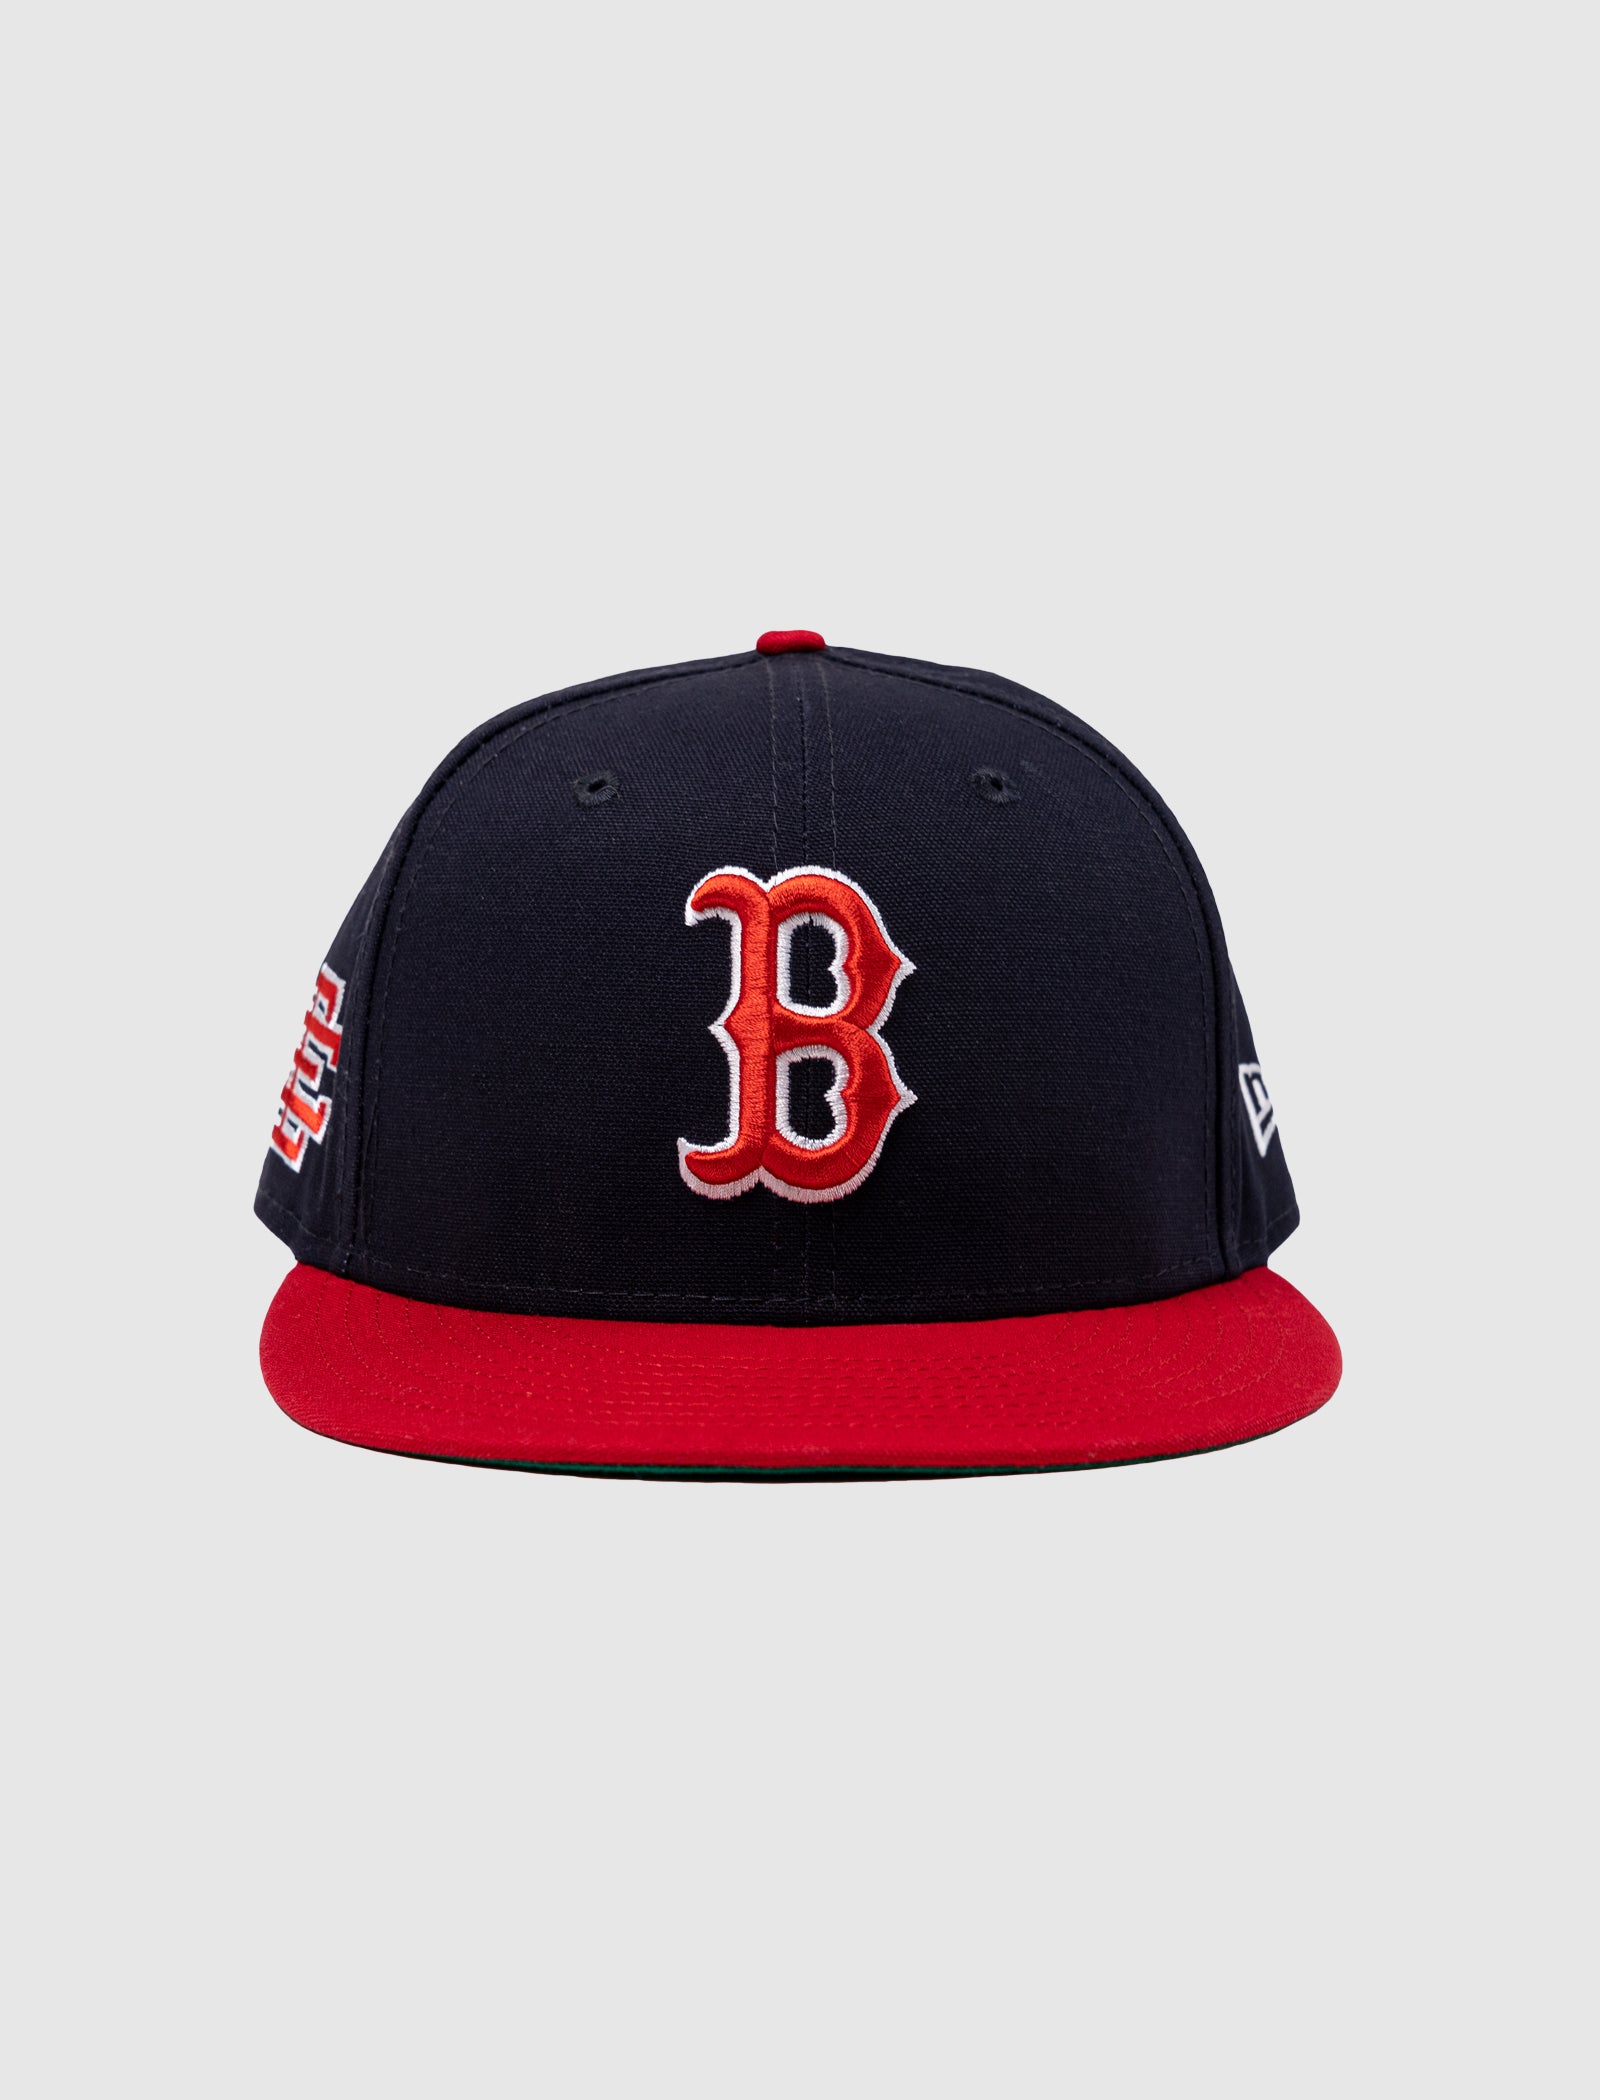 ERIC EMANUEL RED SOX FITTED HAT